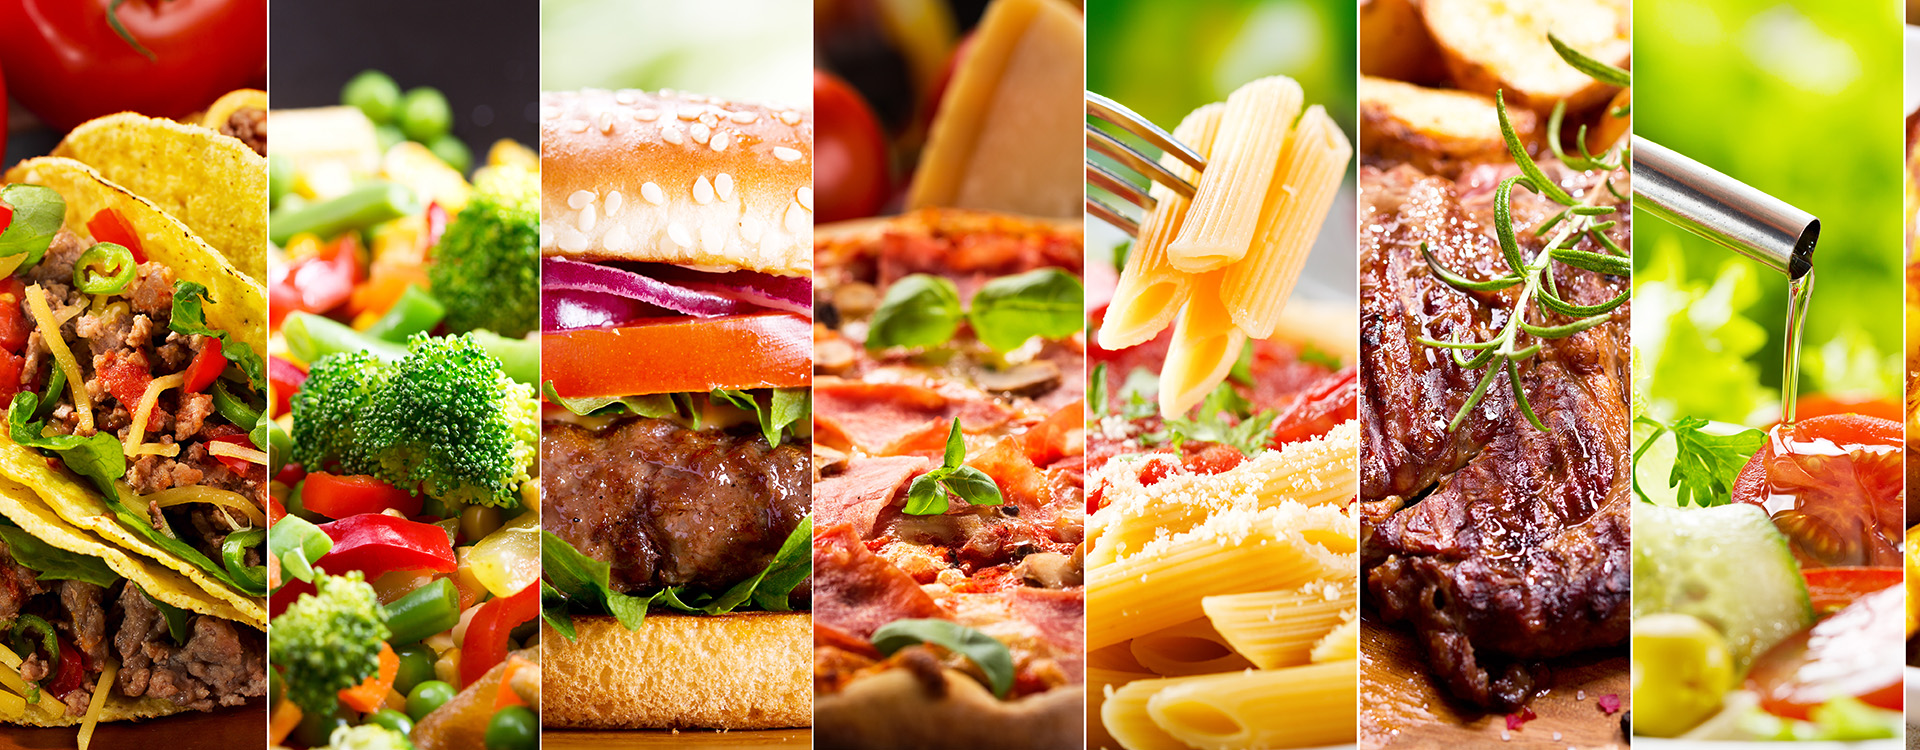 a collage of food items, from tacos to salad to pasta to hamburger